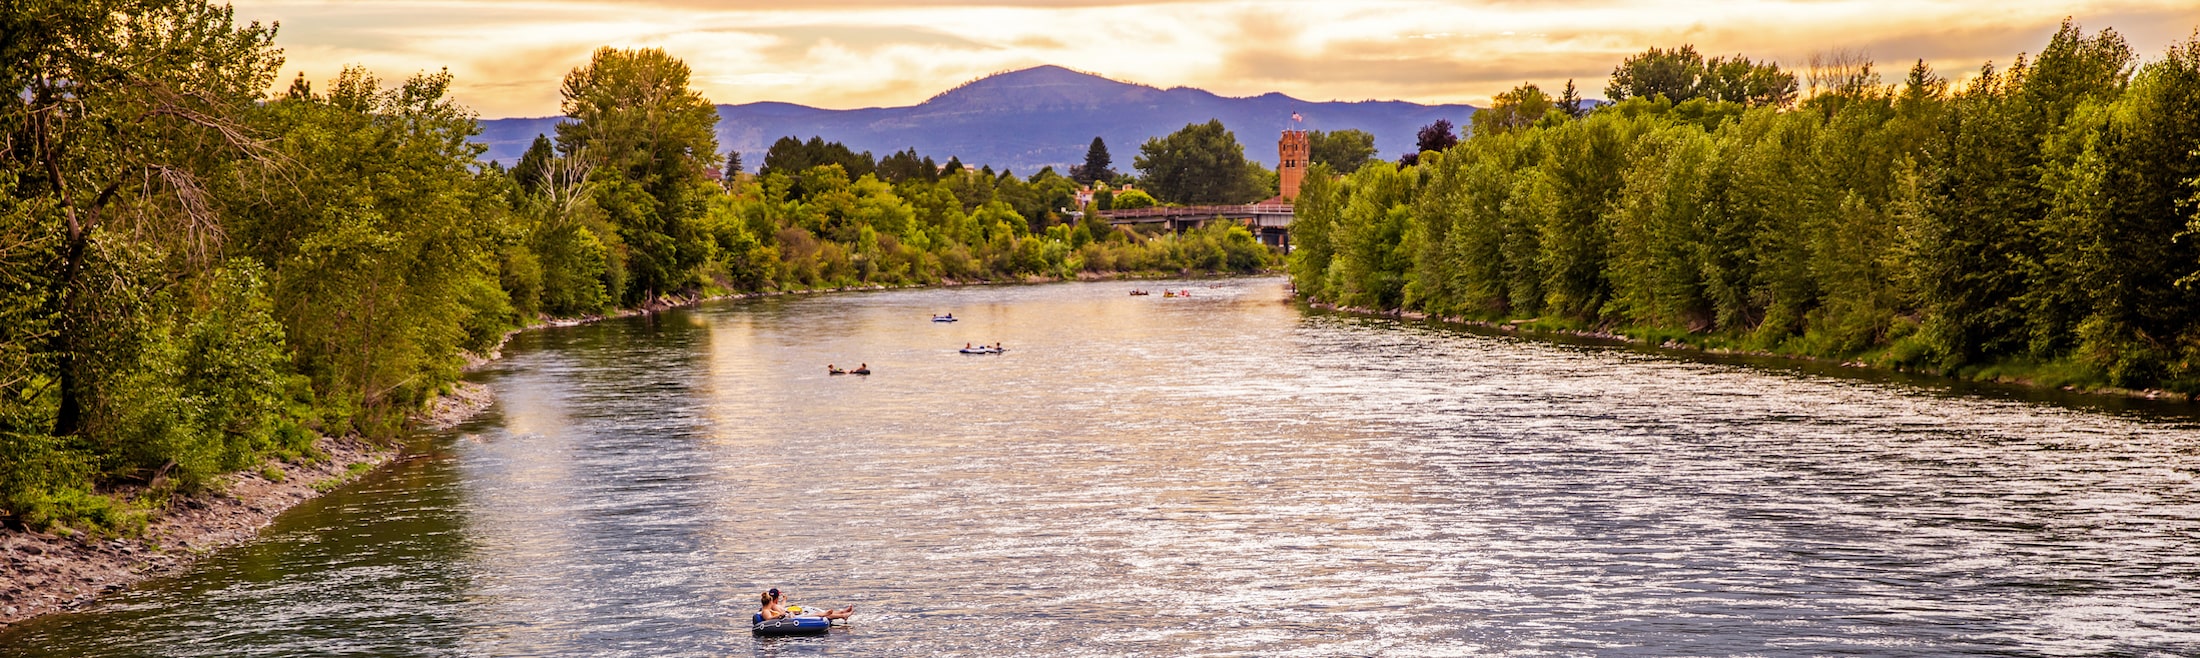 5 Photos That Will Make You Want to Go Tubing in Missoula